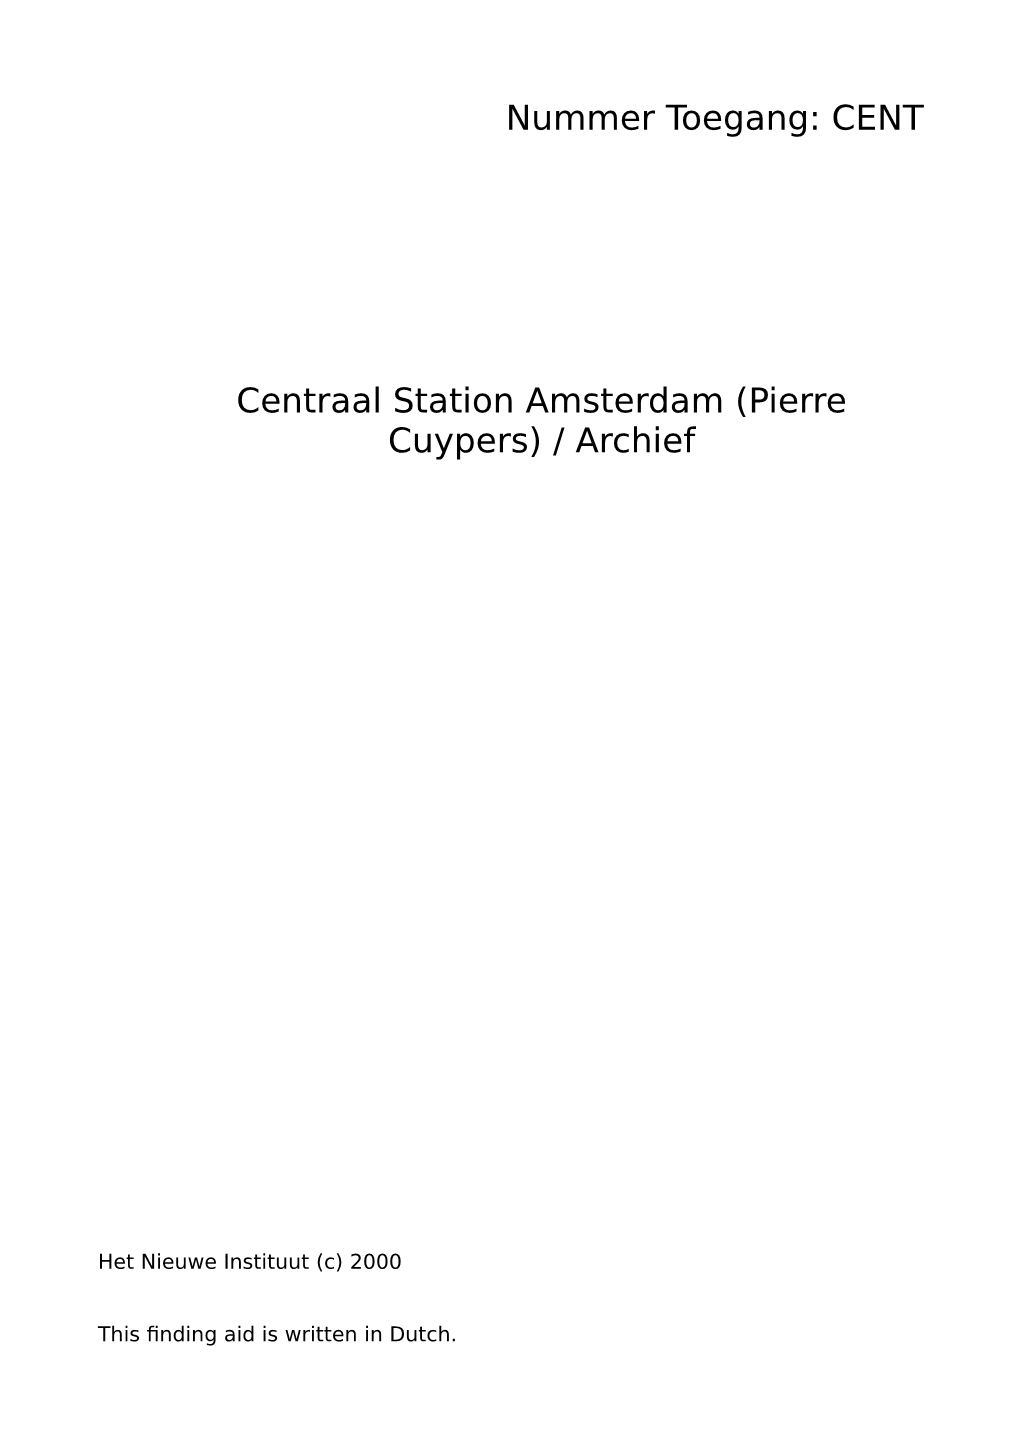 CENT Centraal Station Amsterdam (Pierre Cuypers) / Archief